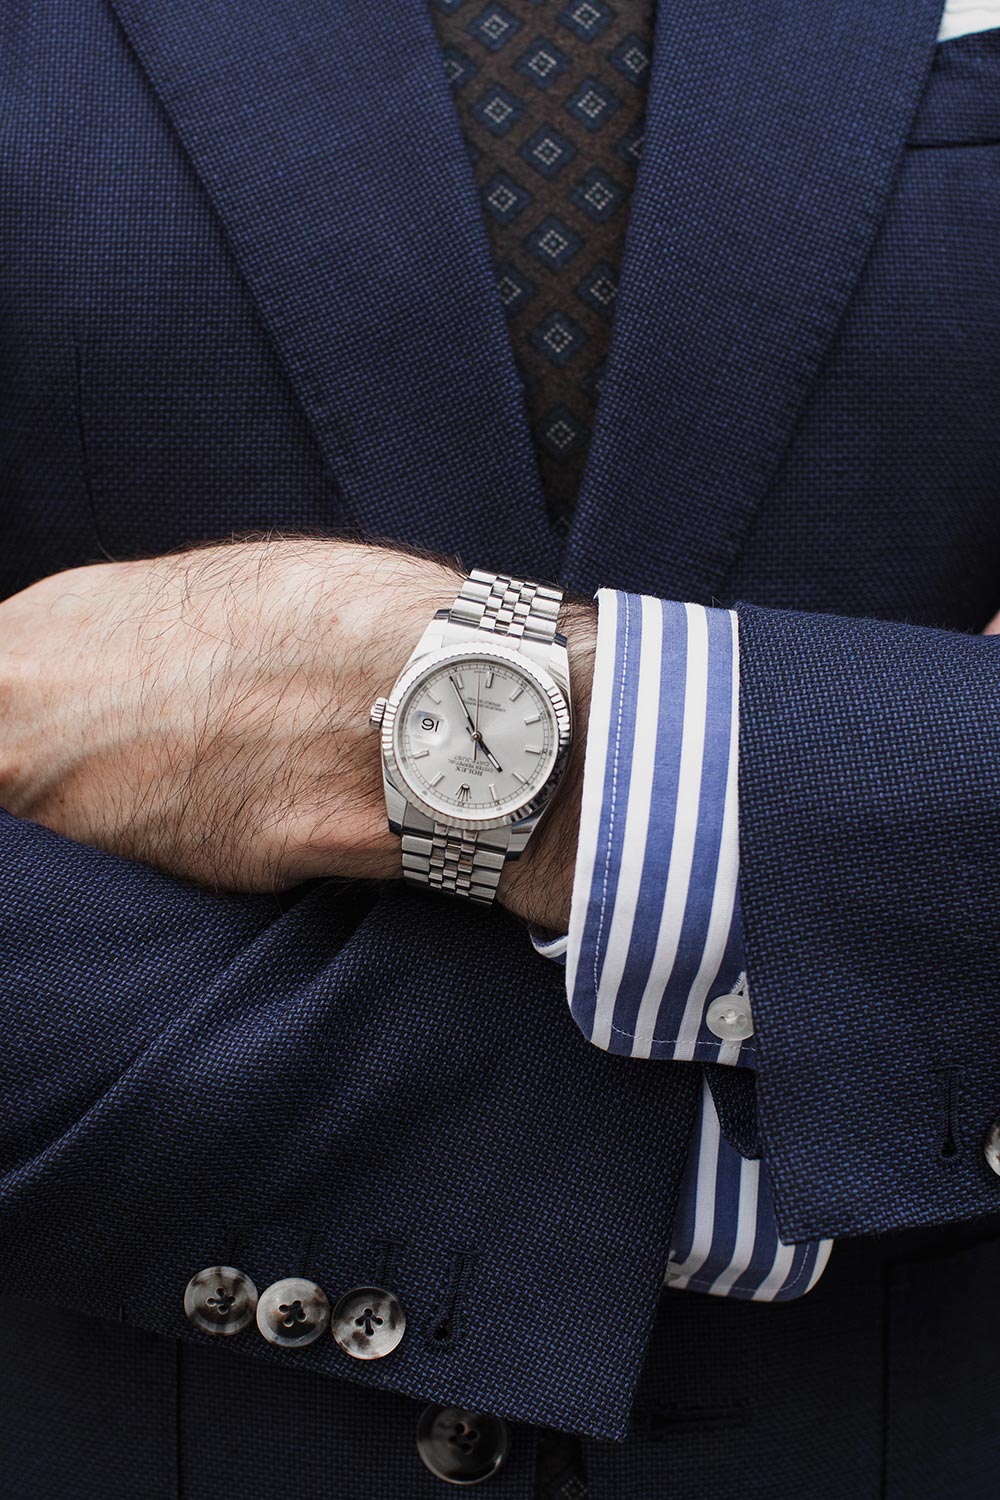 rolex-datejust-with-navy-suit